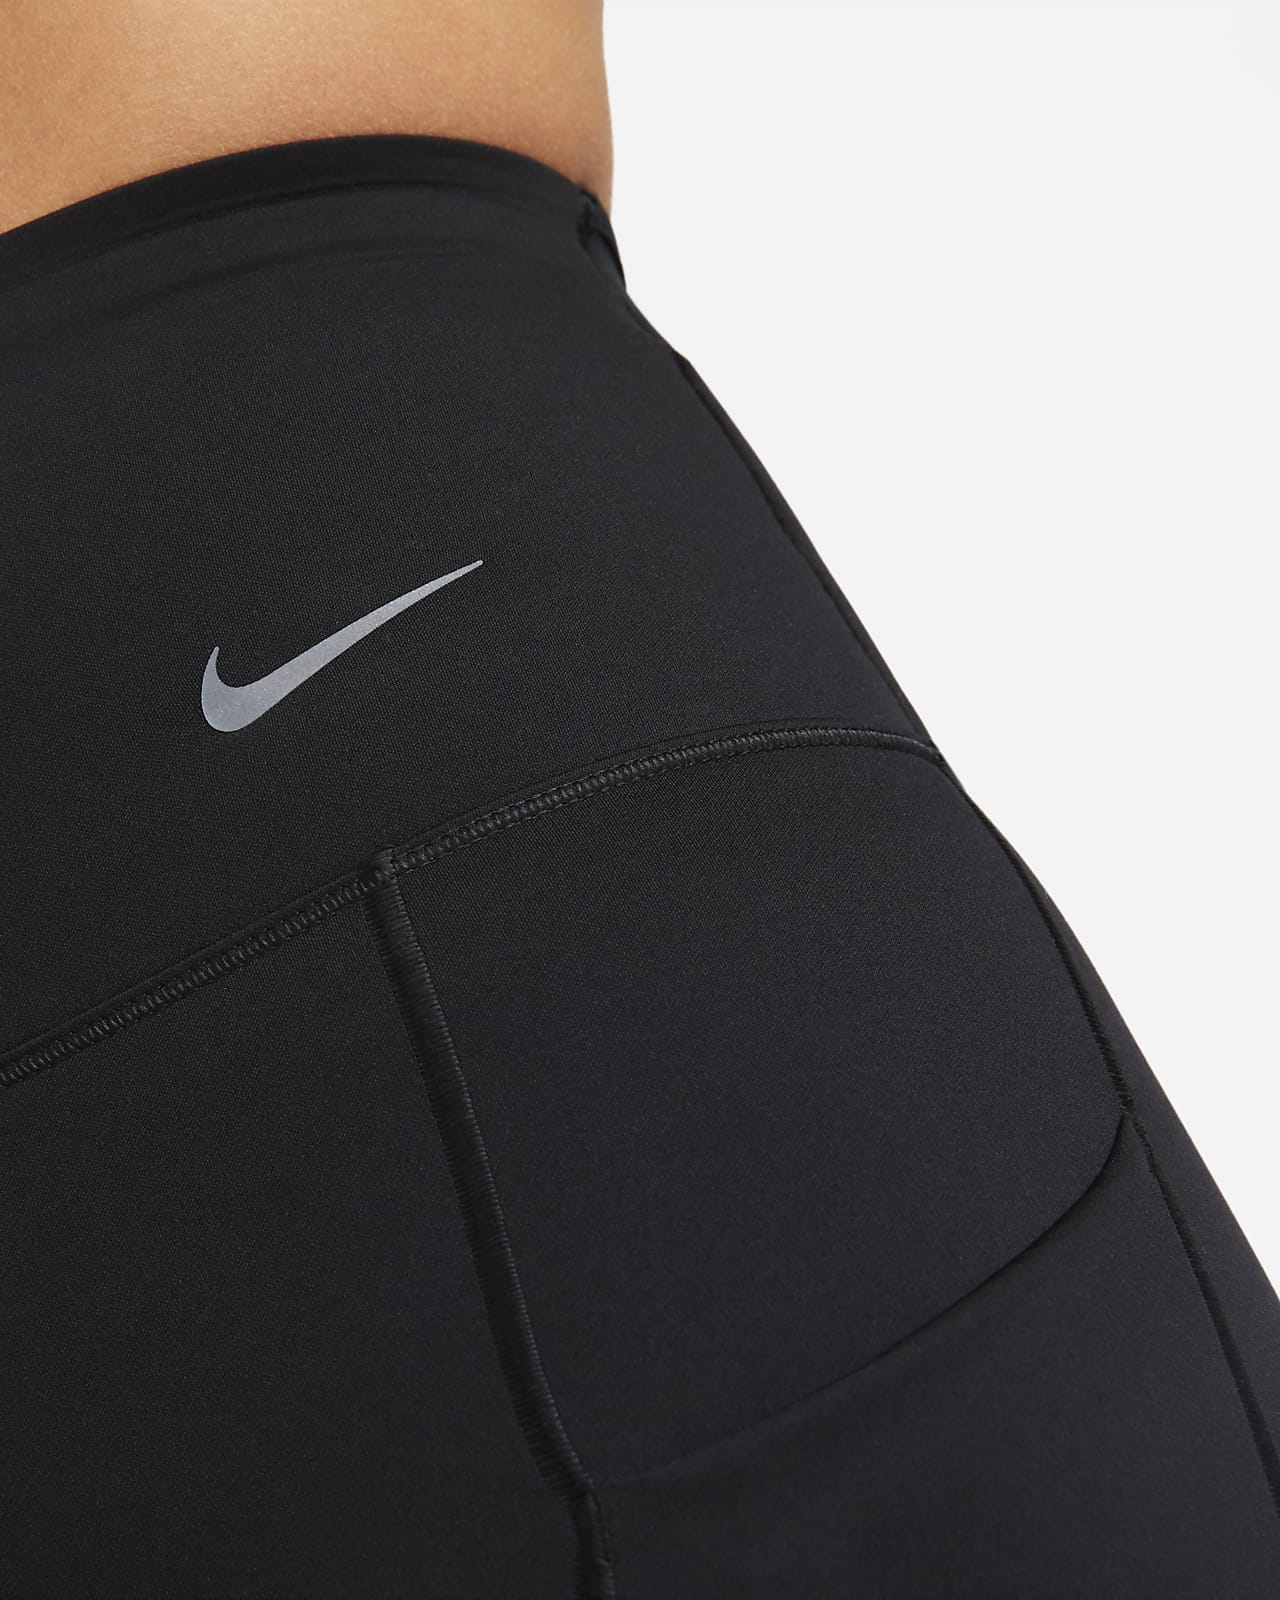 Women's Firm-Support High-Waisted Capri Leggings with Pockets. Nike .com